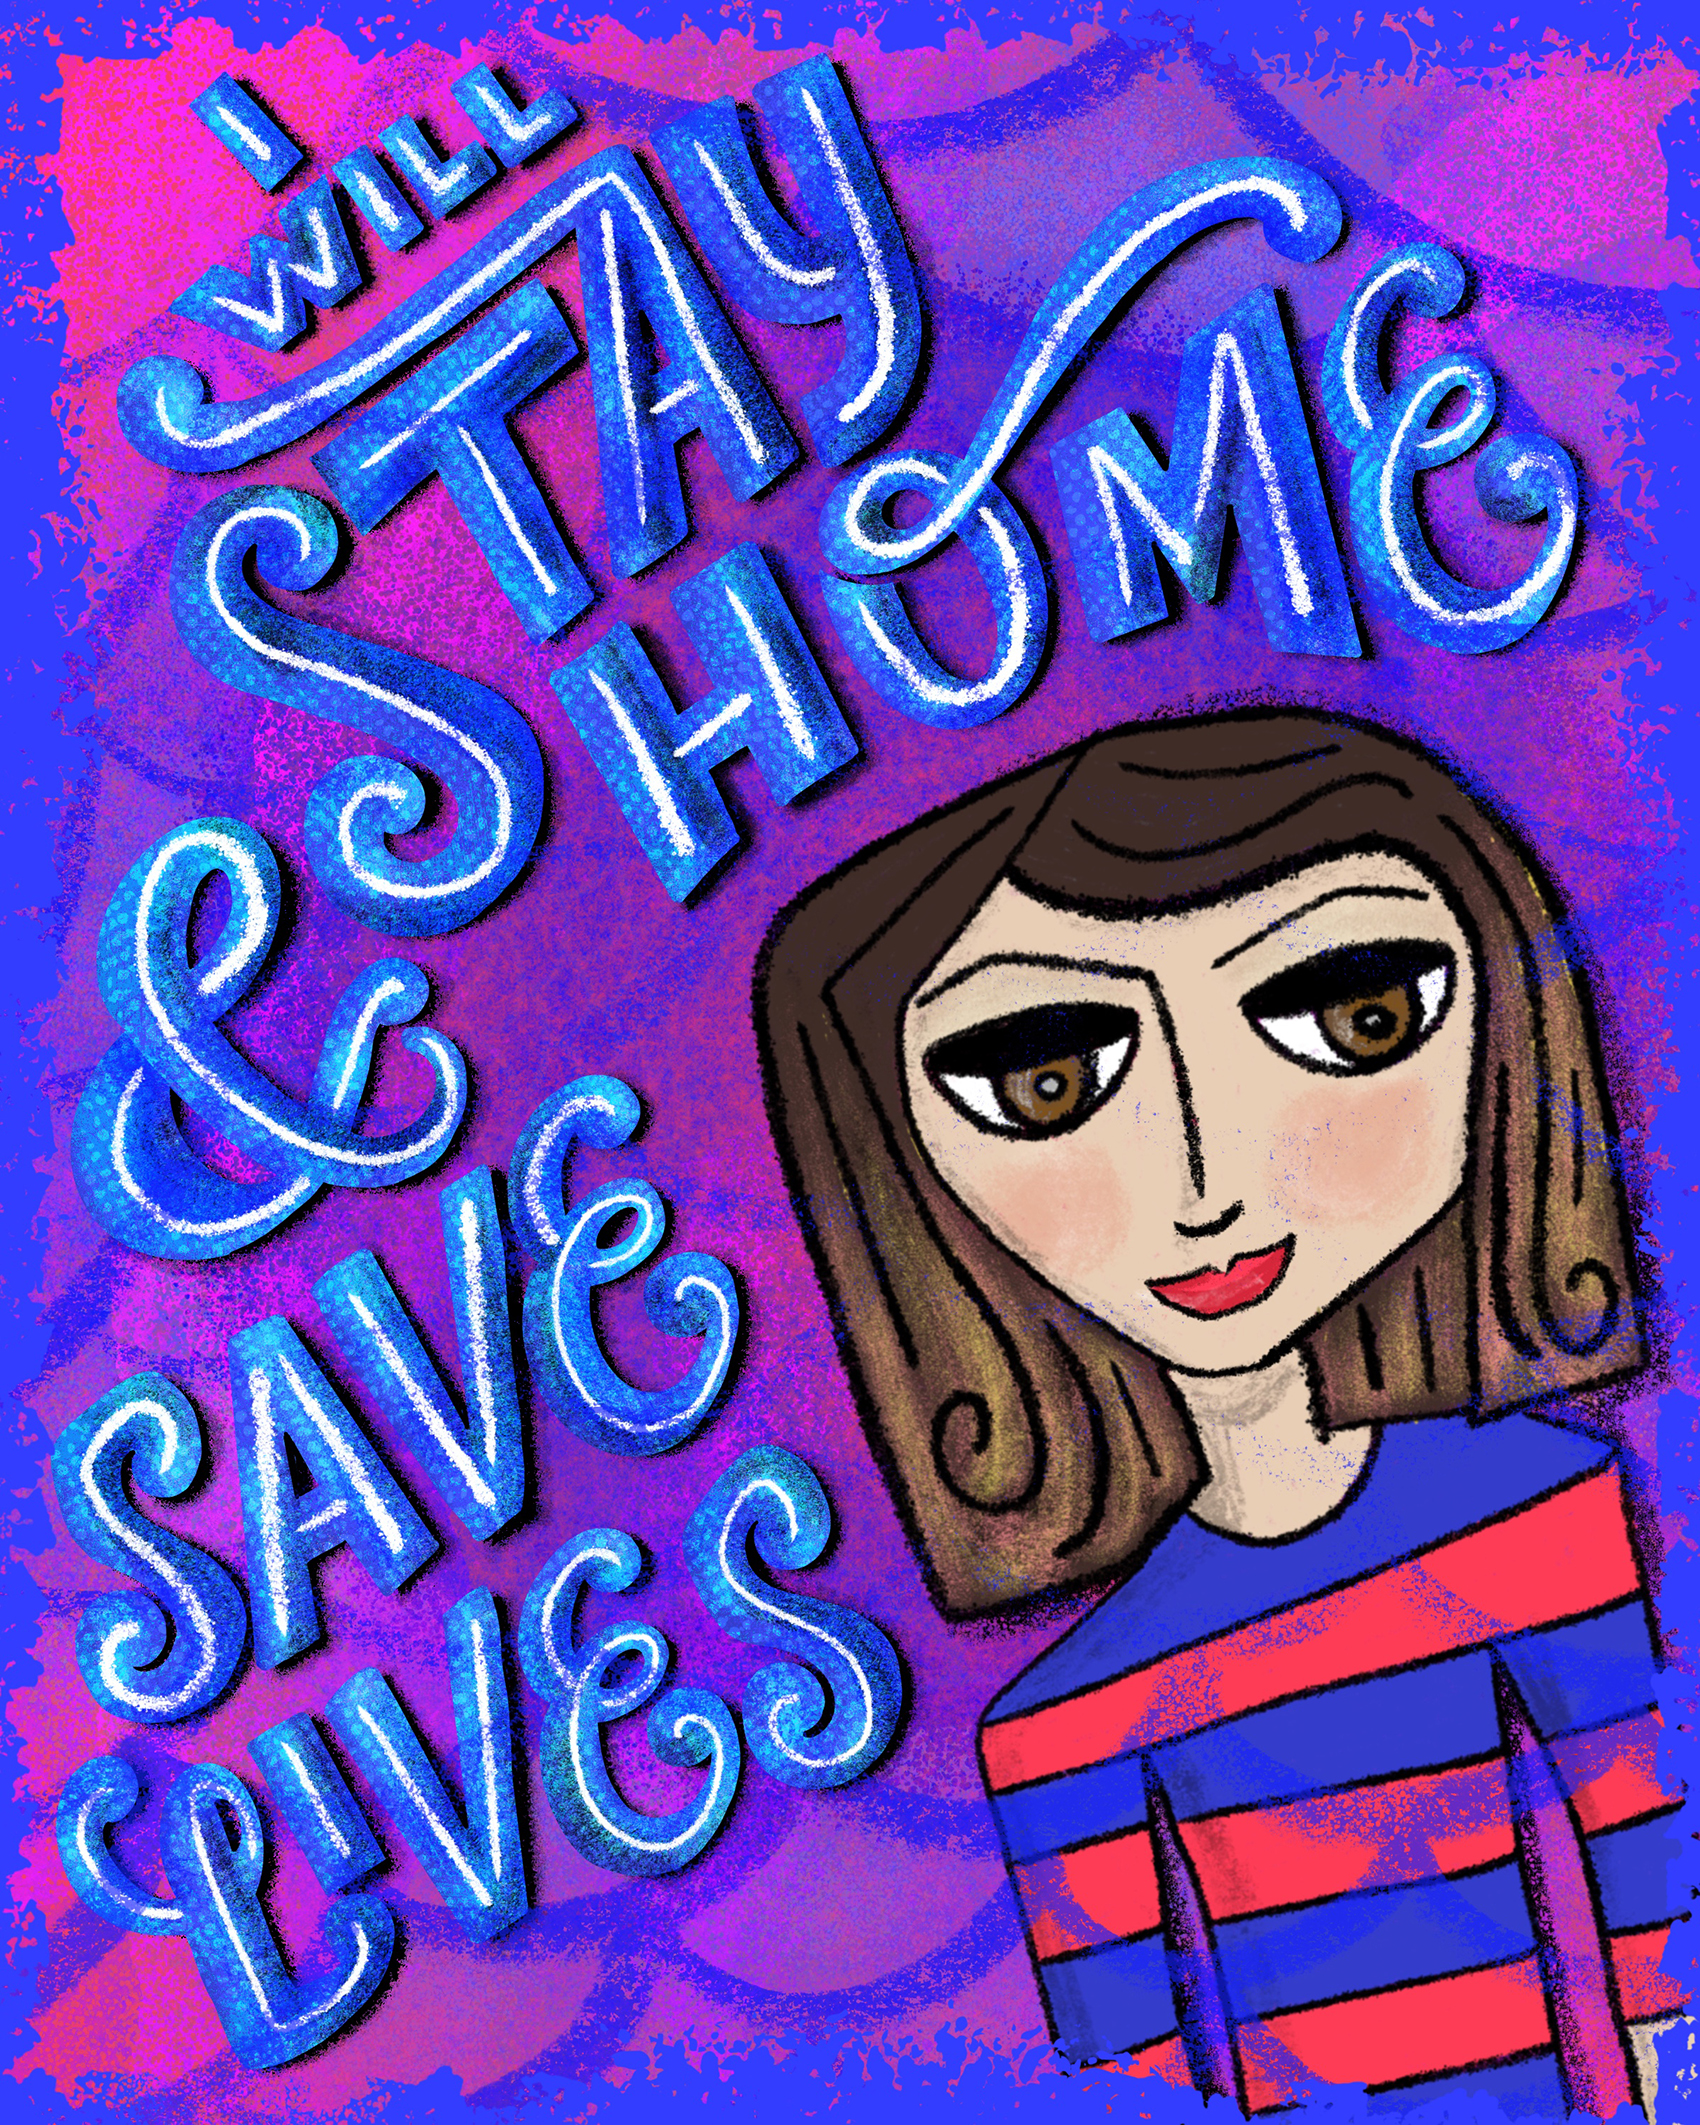 I Will Stay Home And Save Lives - Hand lettering illustration, vibrant, colorful, hand-drawn letters.